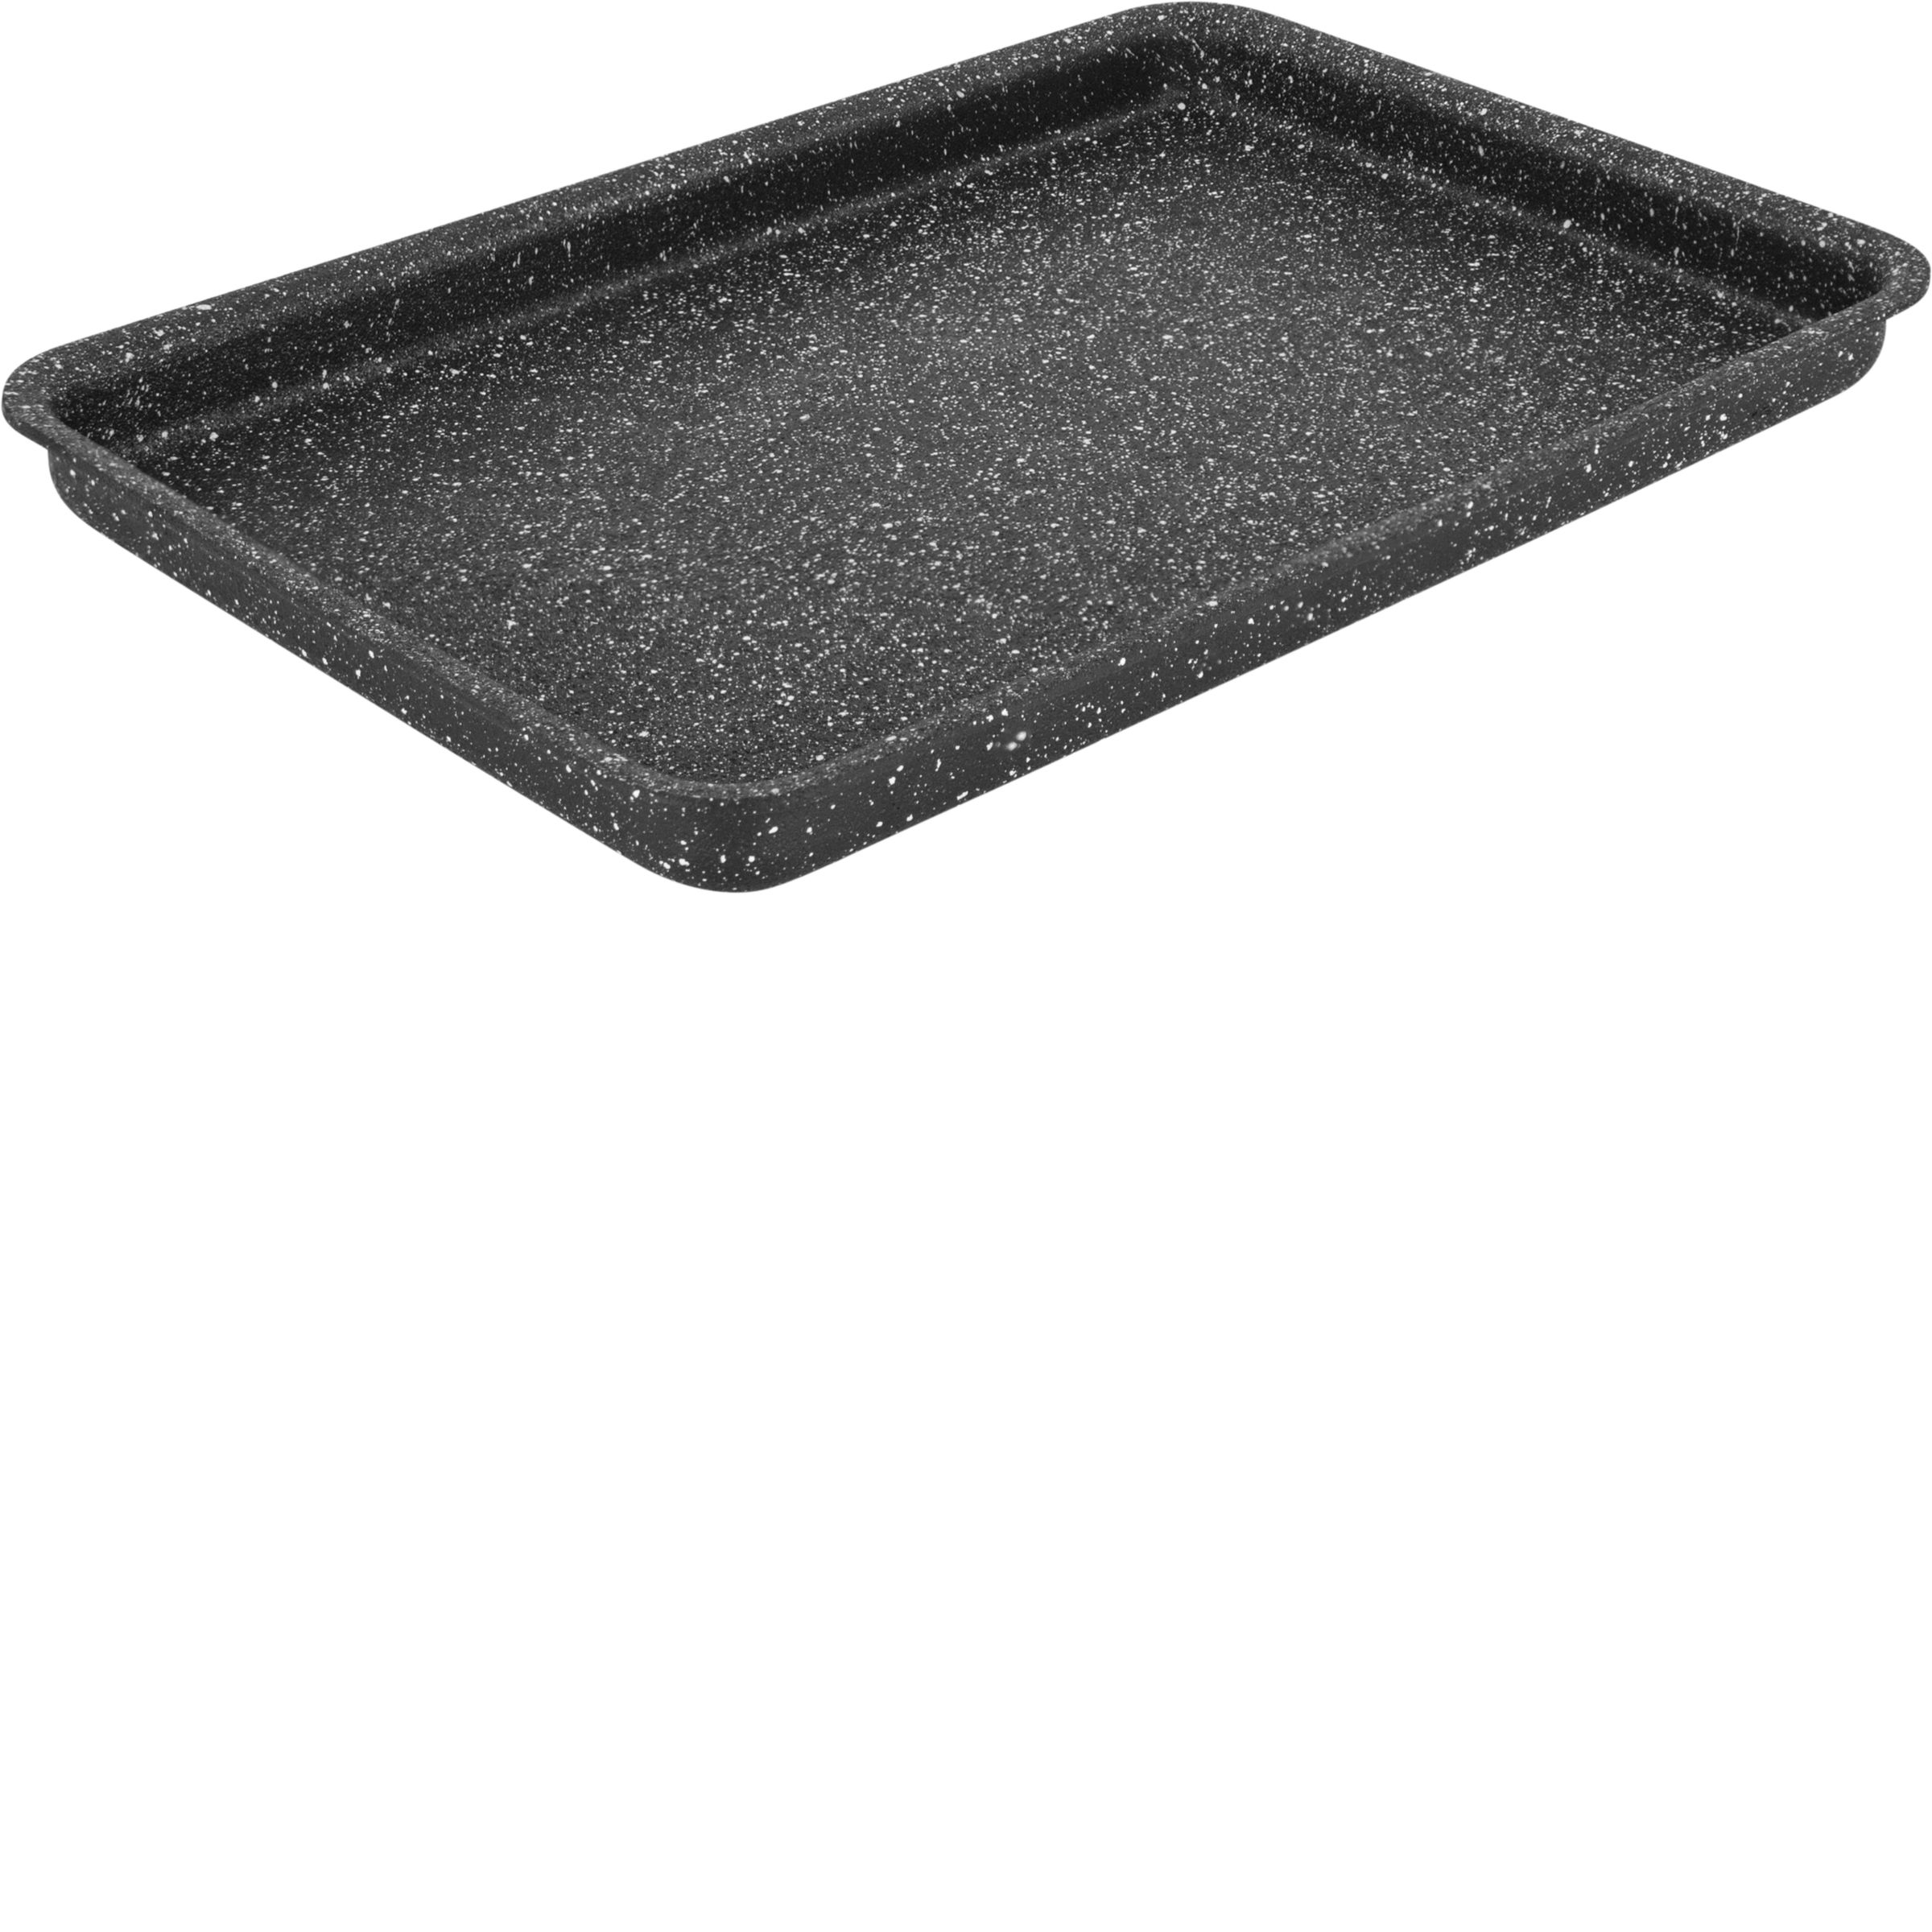 Tala Non-Stick Reusable Silicone Baking Tray Liners, Pack of 20, Clear